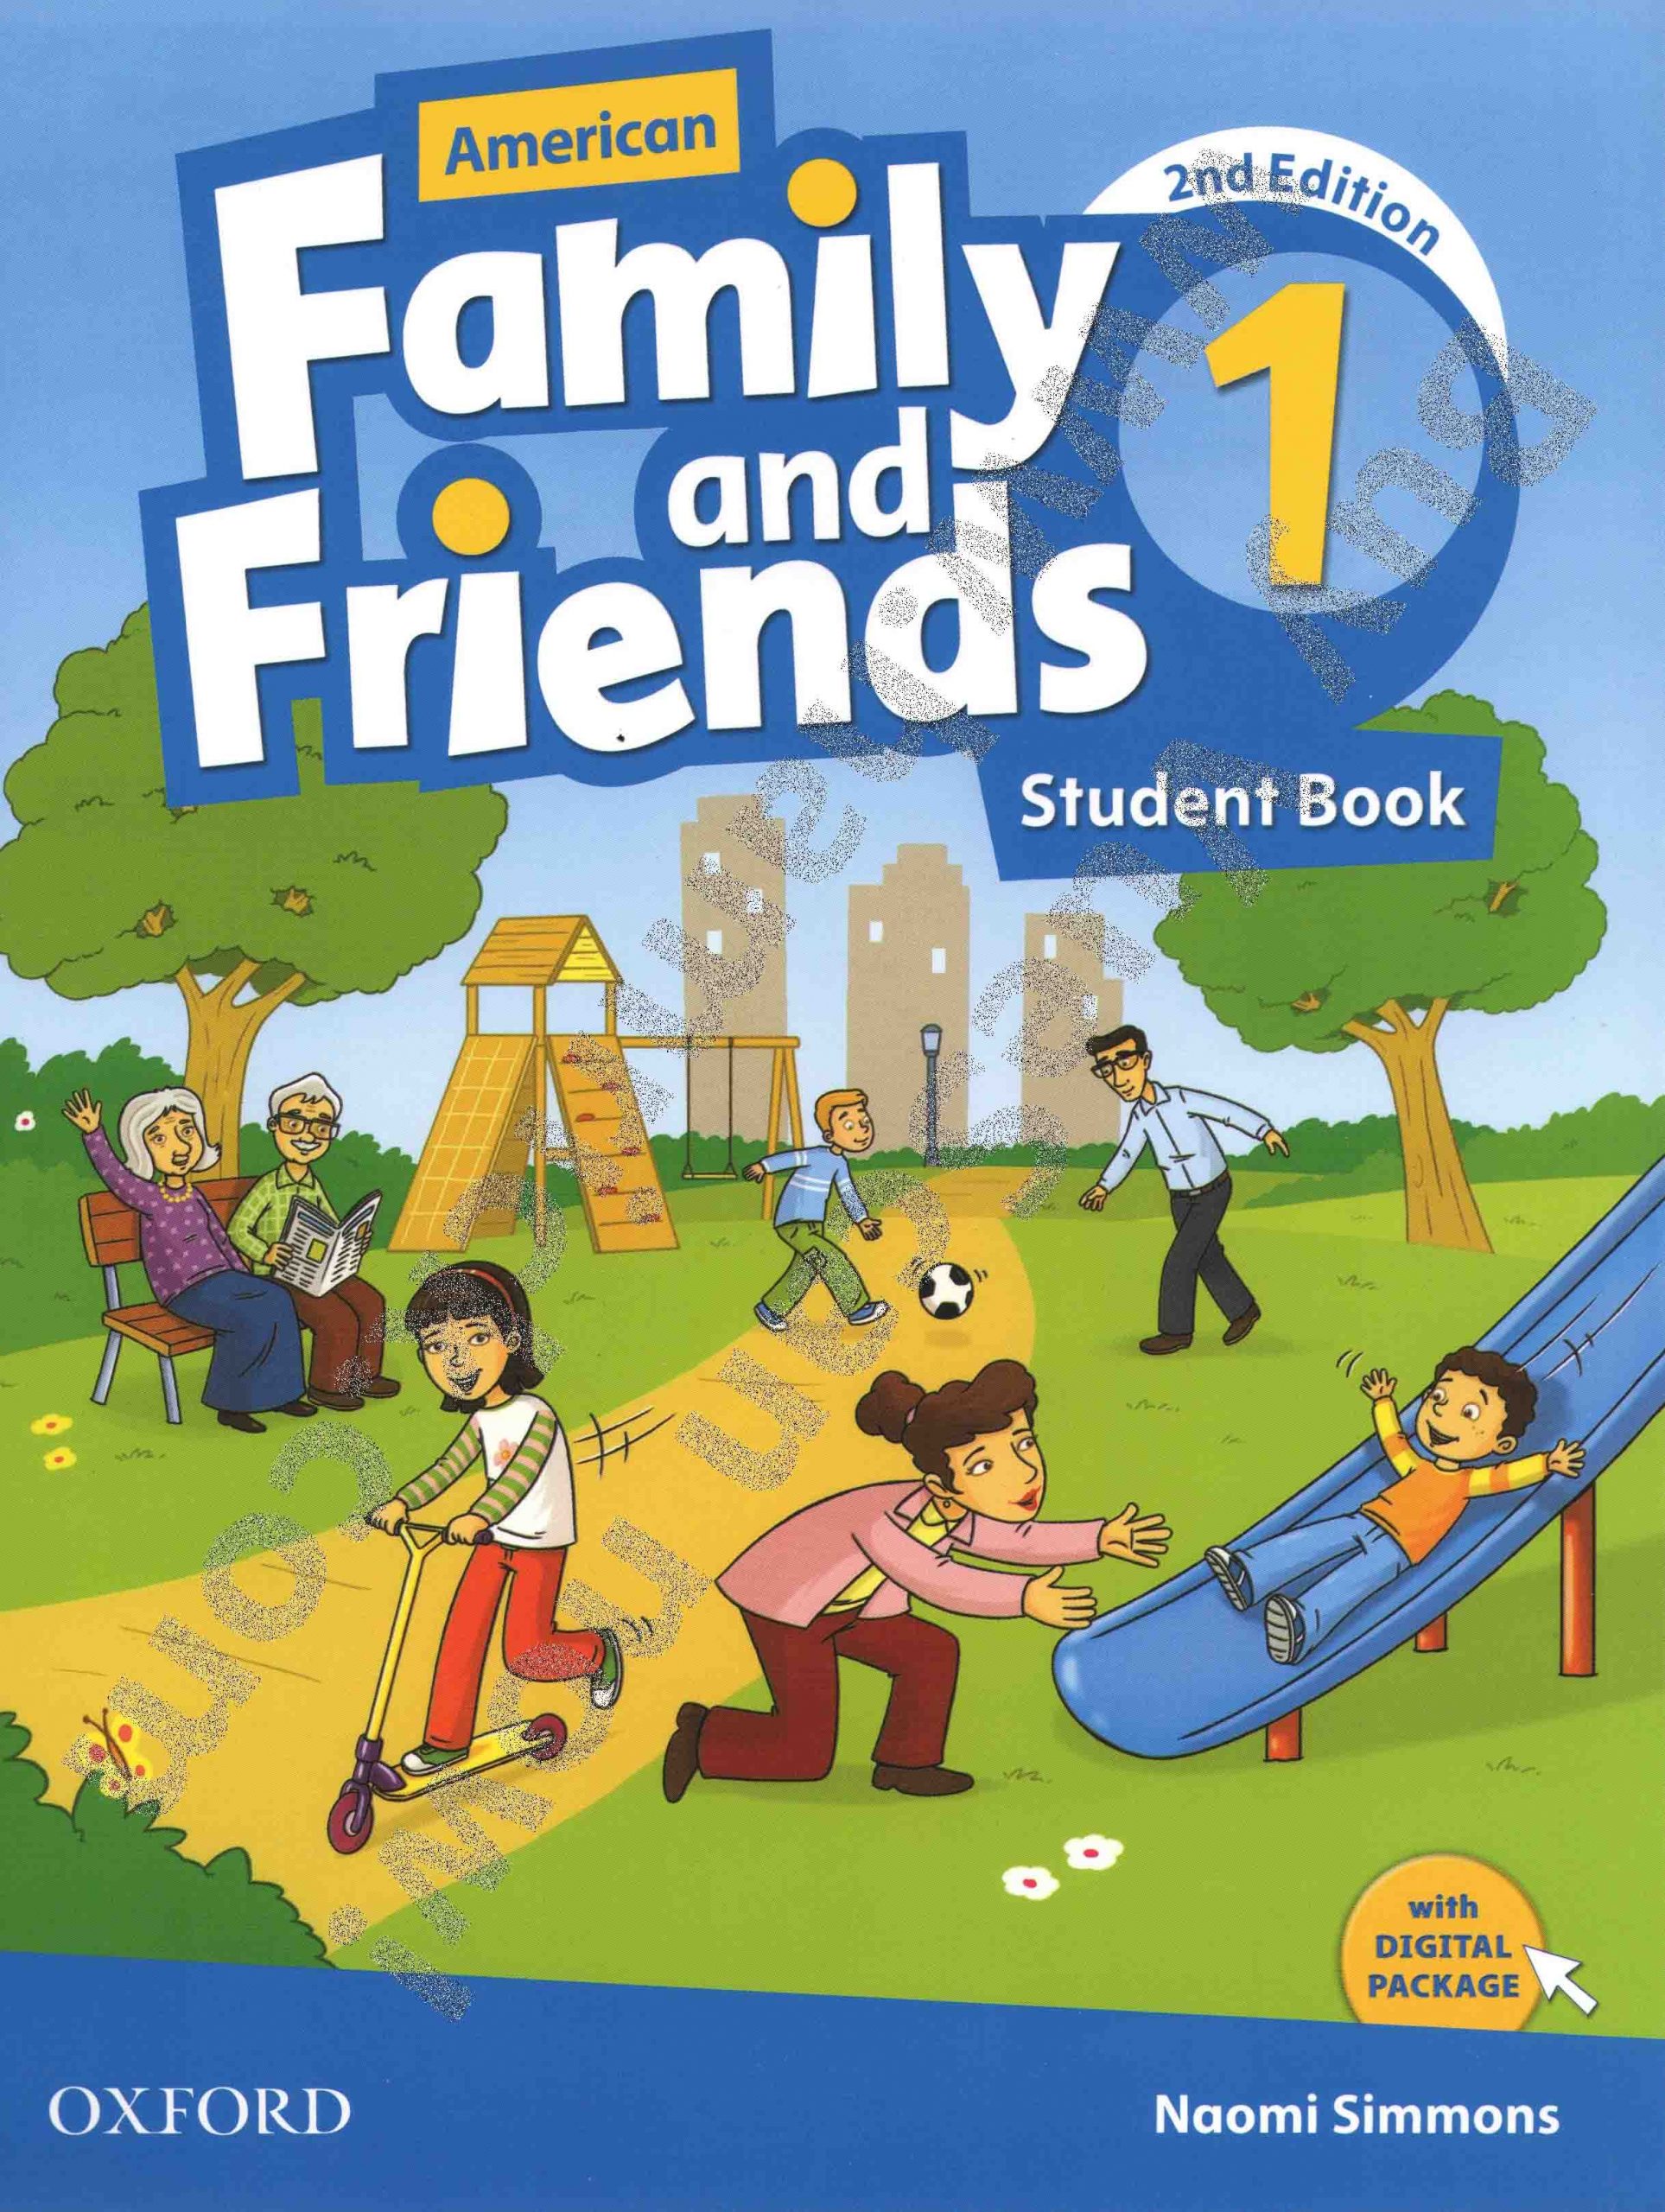 Family and Friends 1